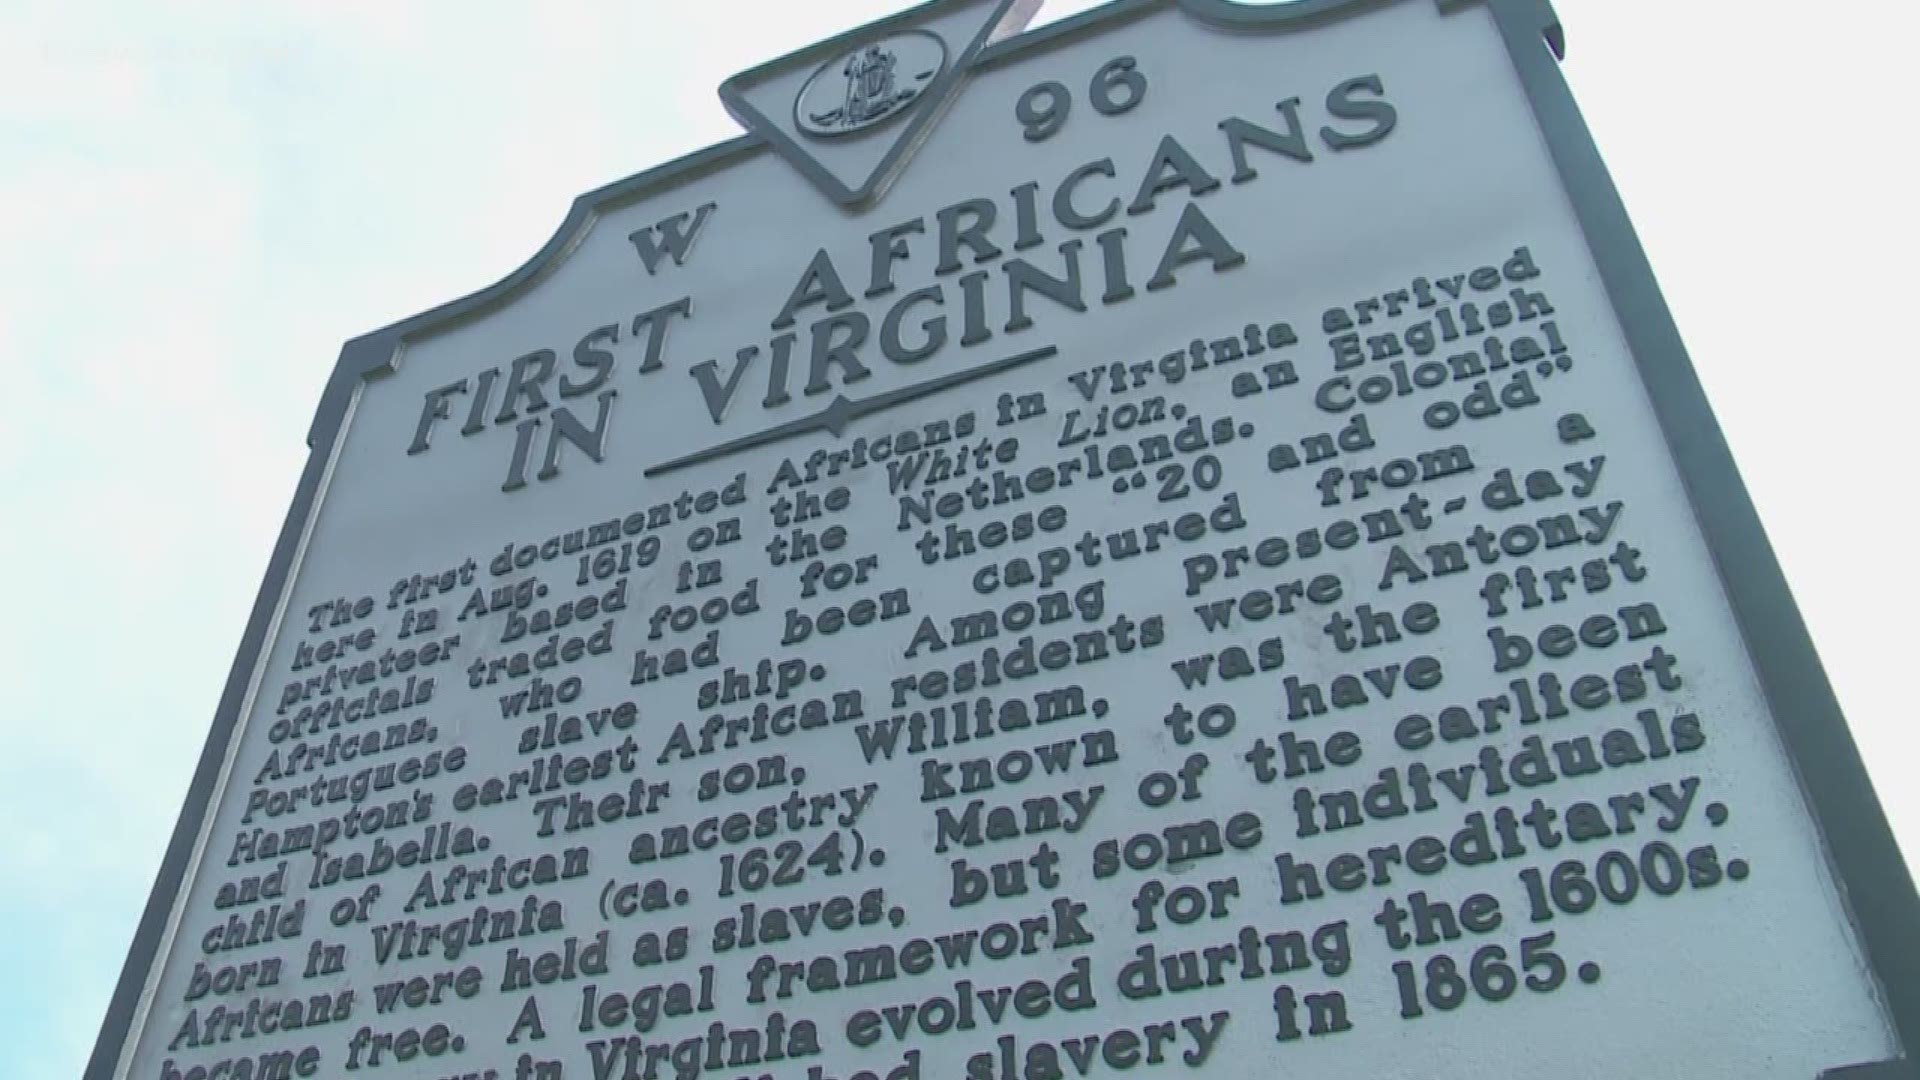 A prayer vigil at Fort Monroe commemorated the arrival of first enslaved Africans in 1619.